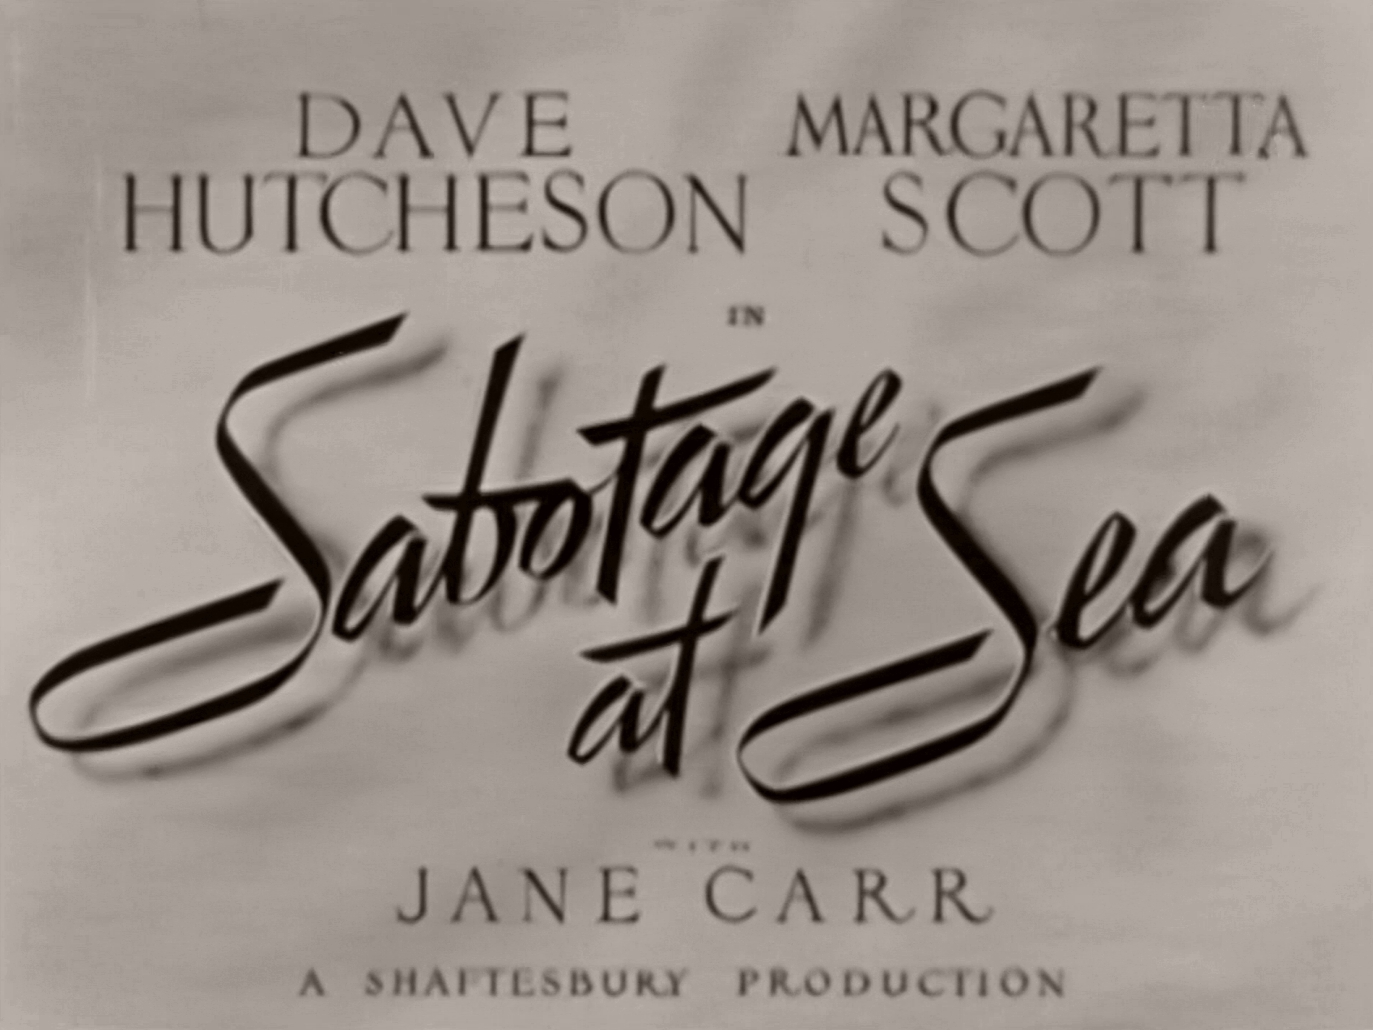 Main title from Sabotage at Sea (1942) (2). David Hutcheson, Margaretta Scott with Jane Carr. A Shaftesbury production